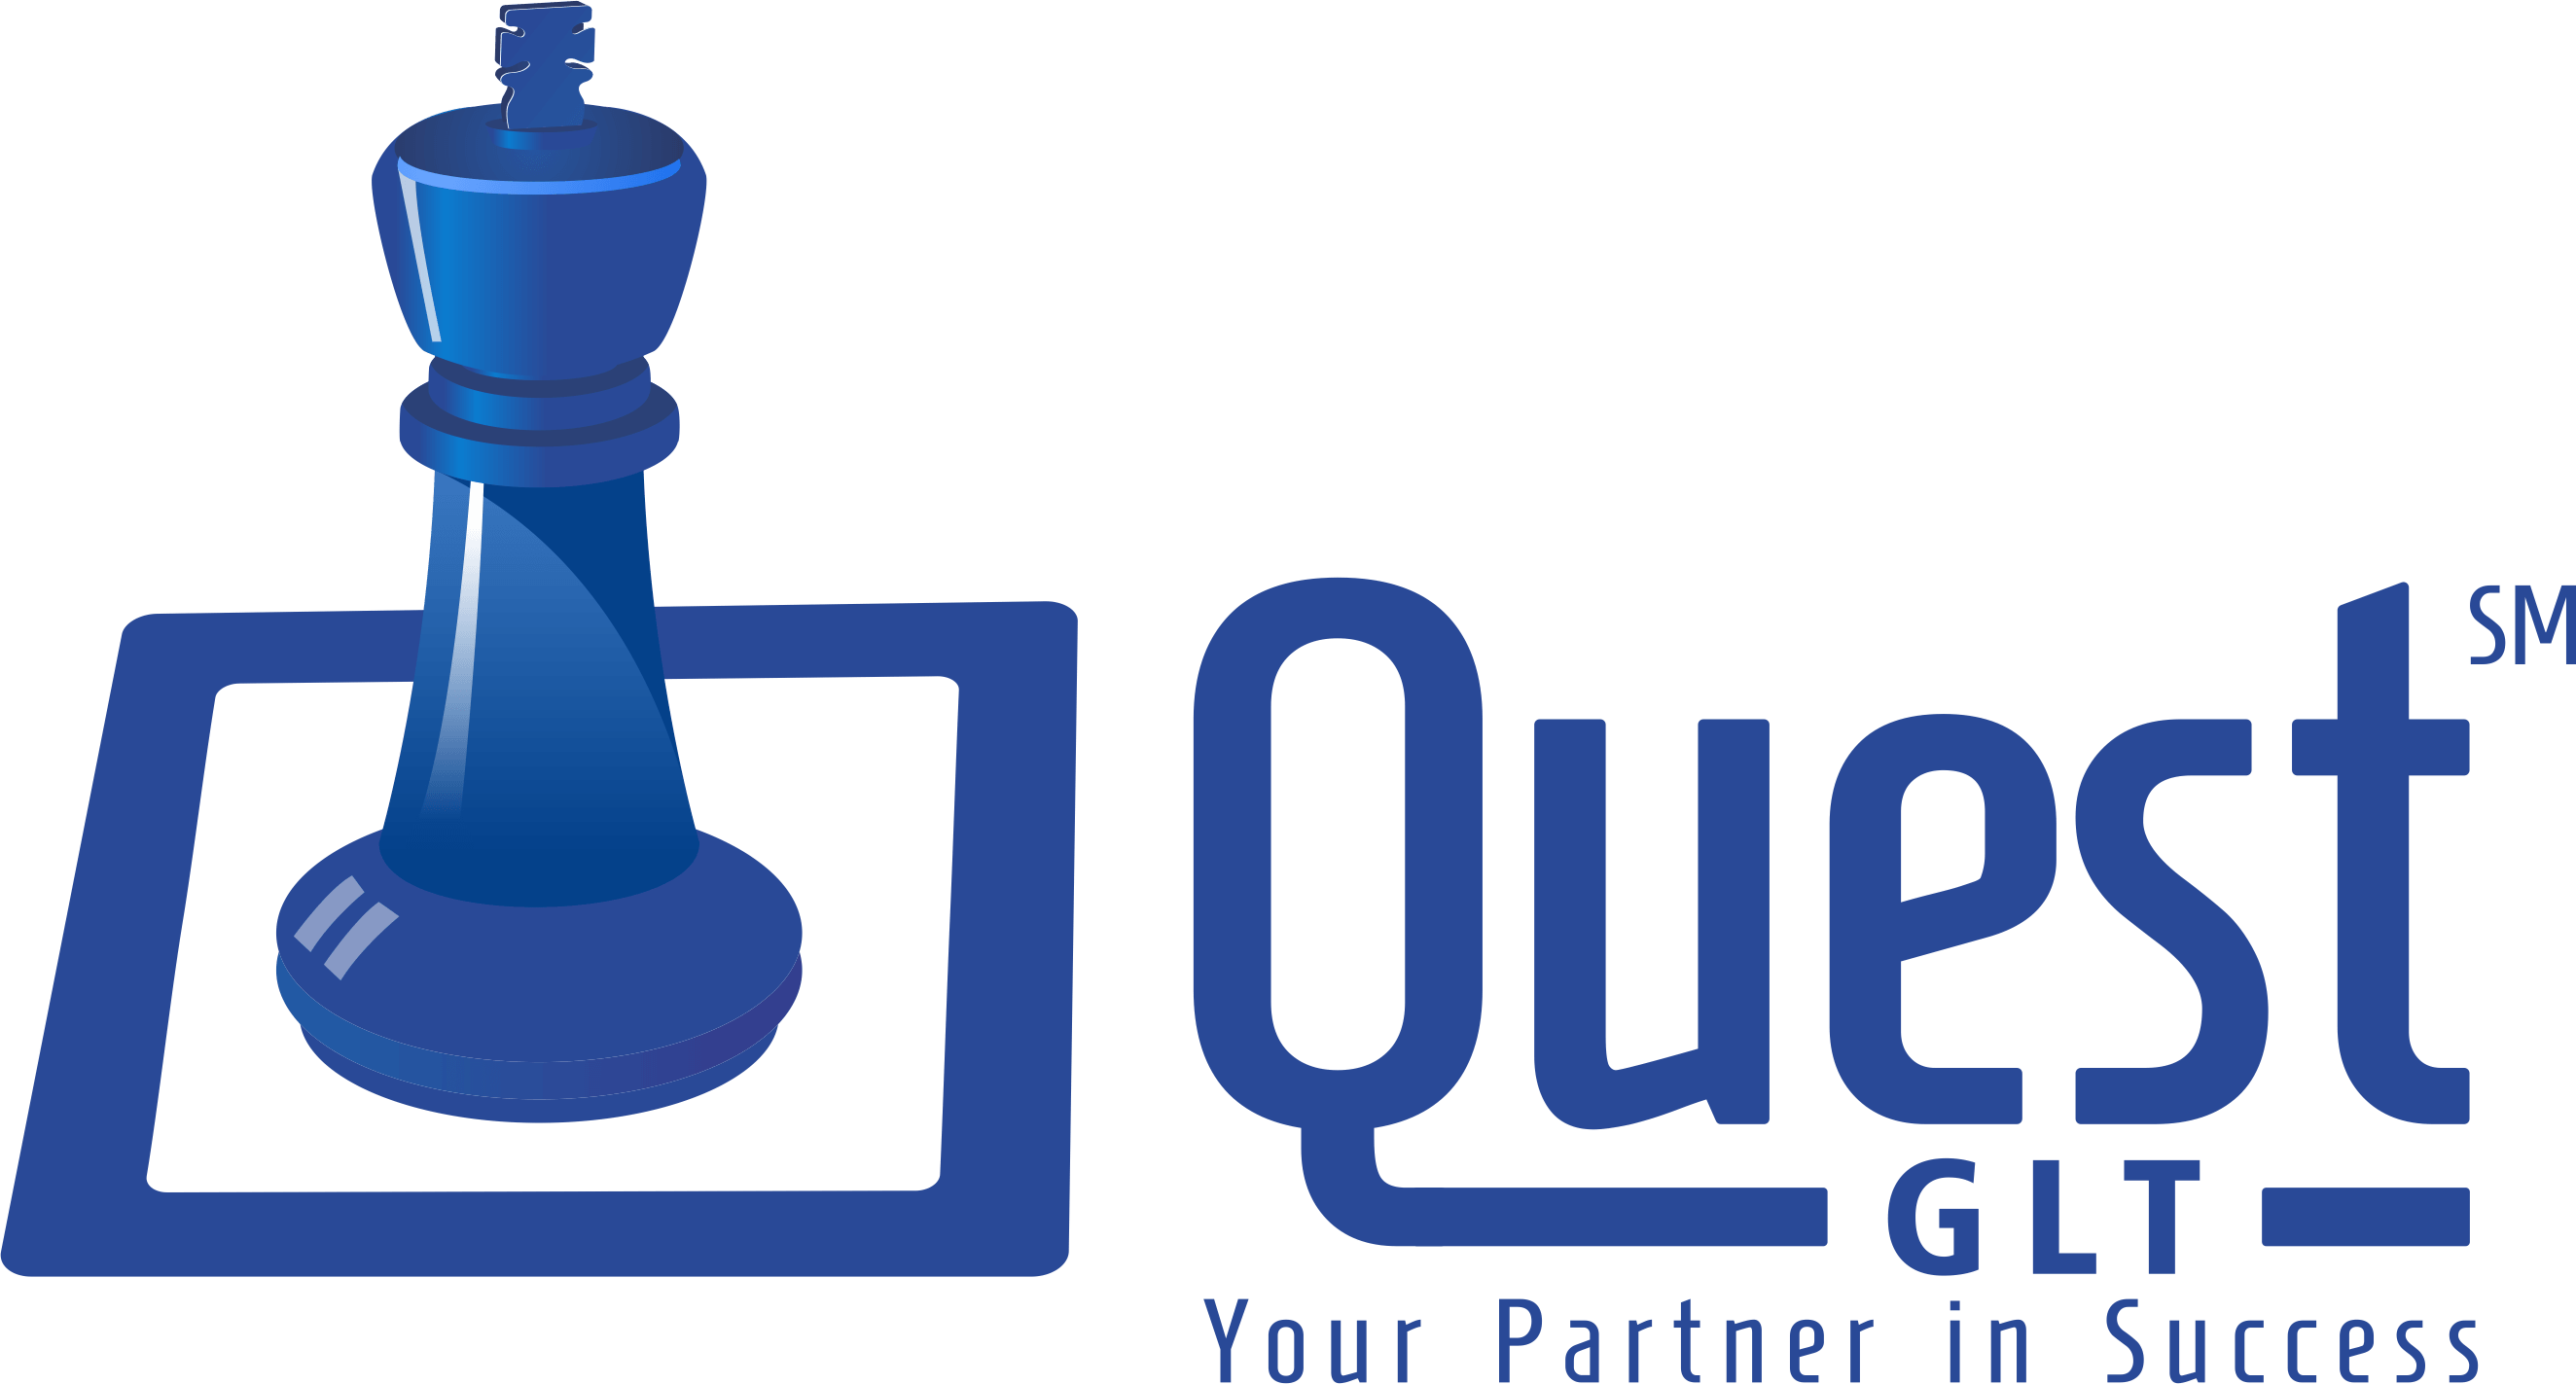 Quest Global Technologies Limited profile on Qualified.One